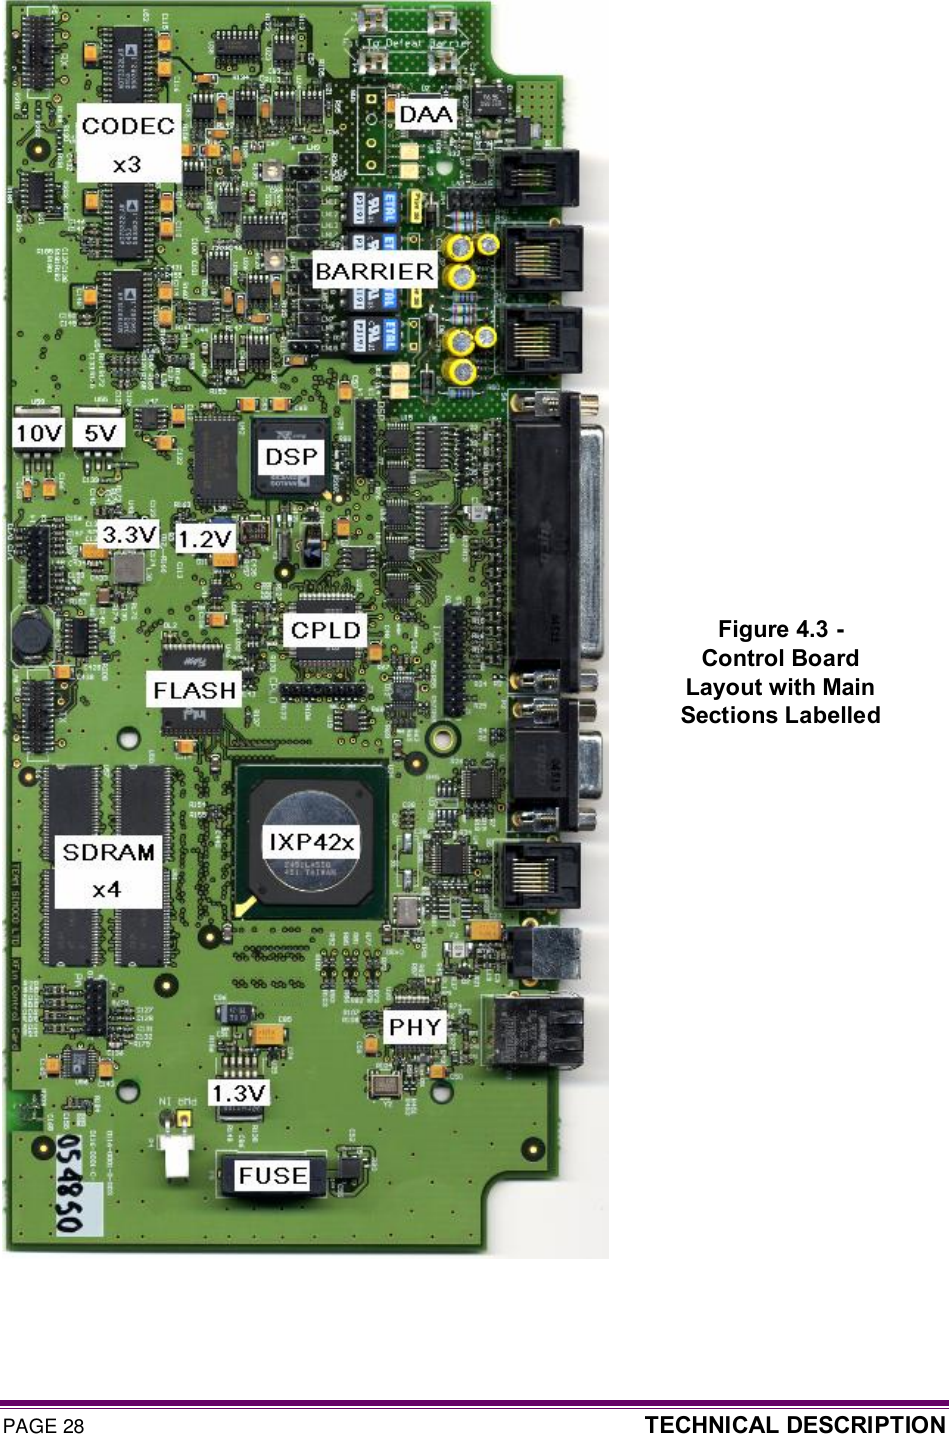 PAGE 28  TECHNICAL DESCRIPTION    Figure 4.3 - Control Board Layout with Main Sections Labelled 